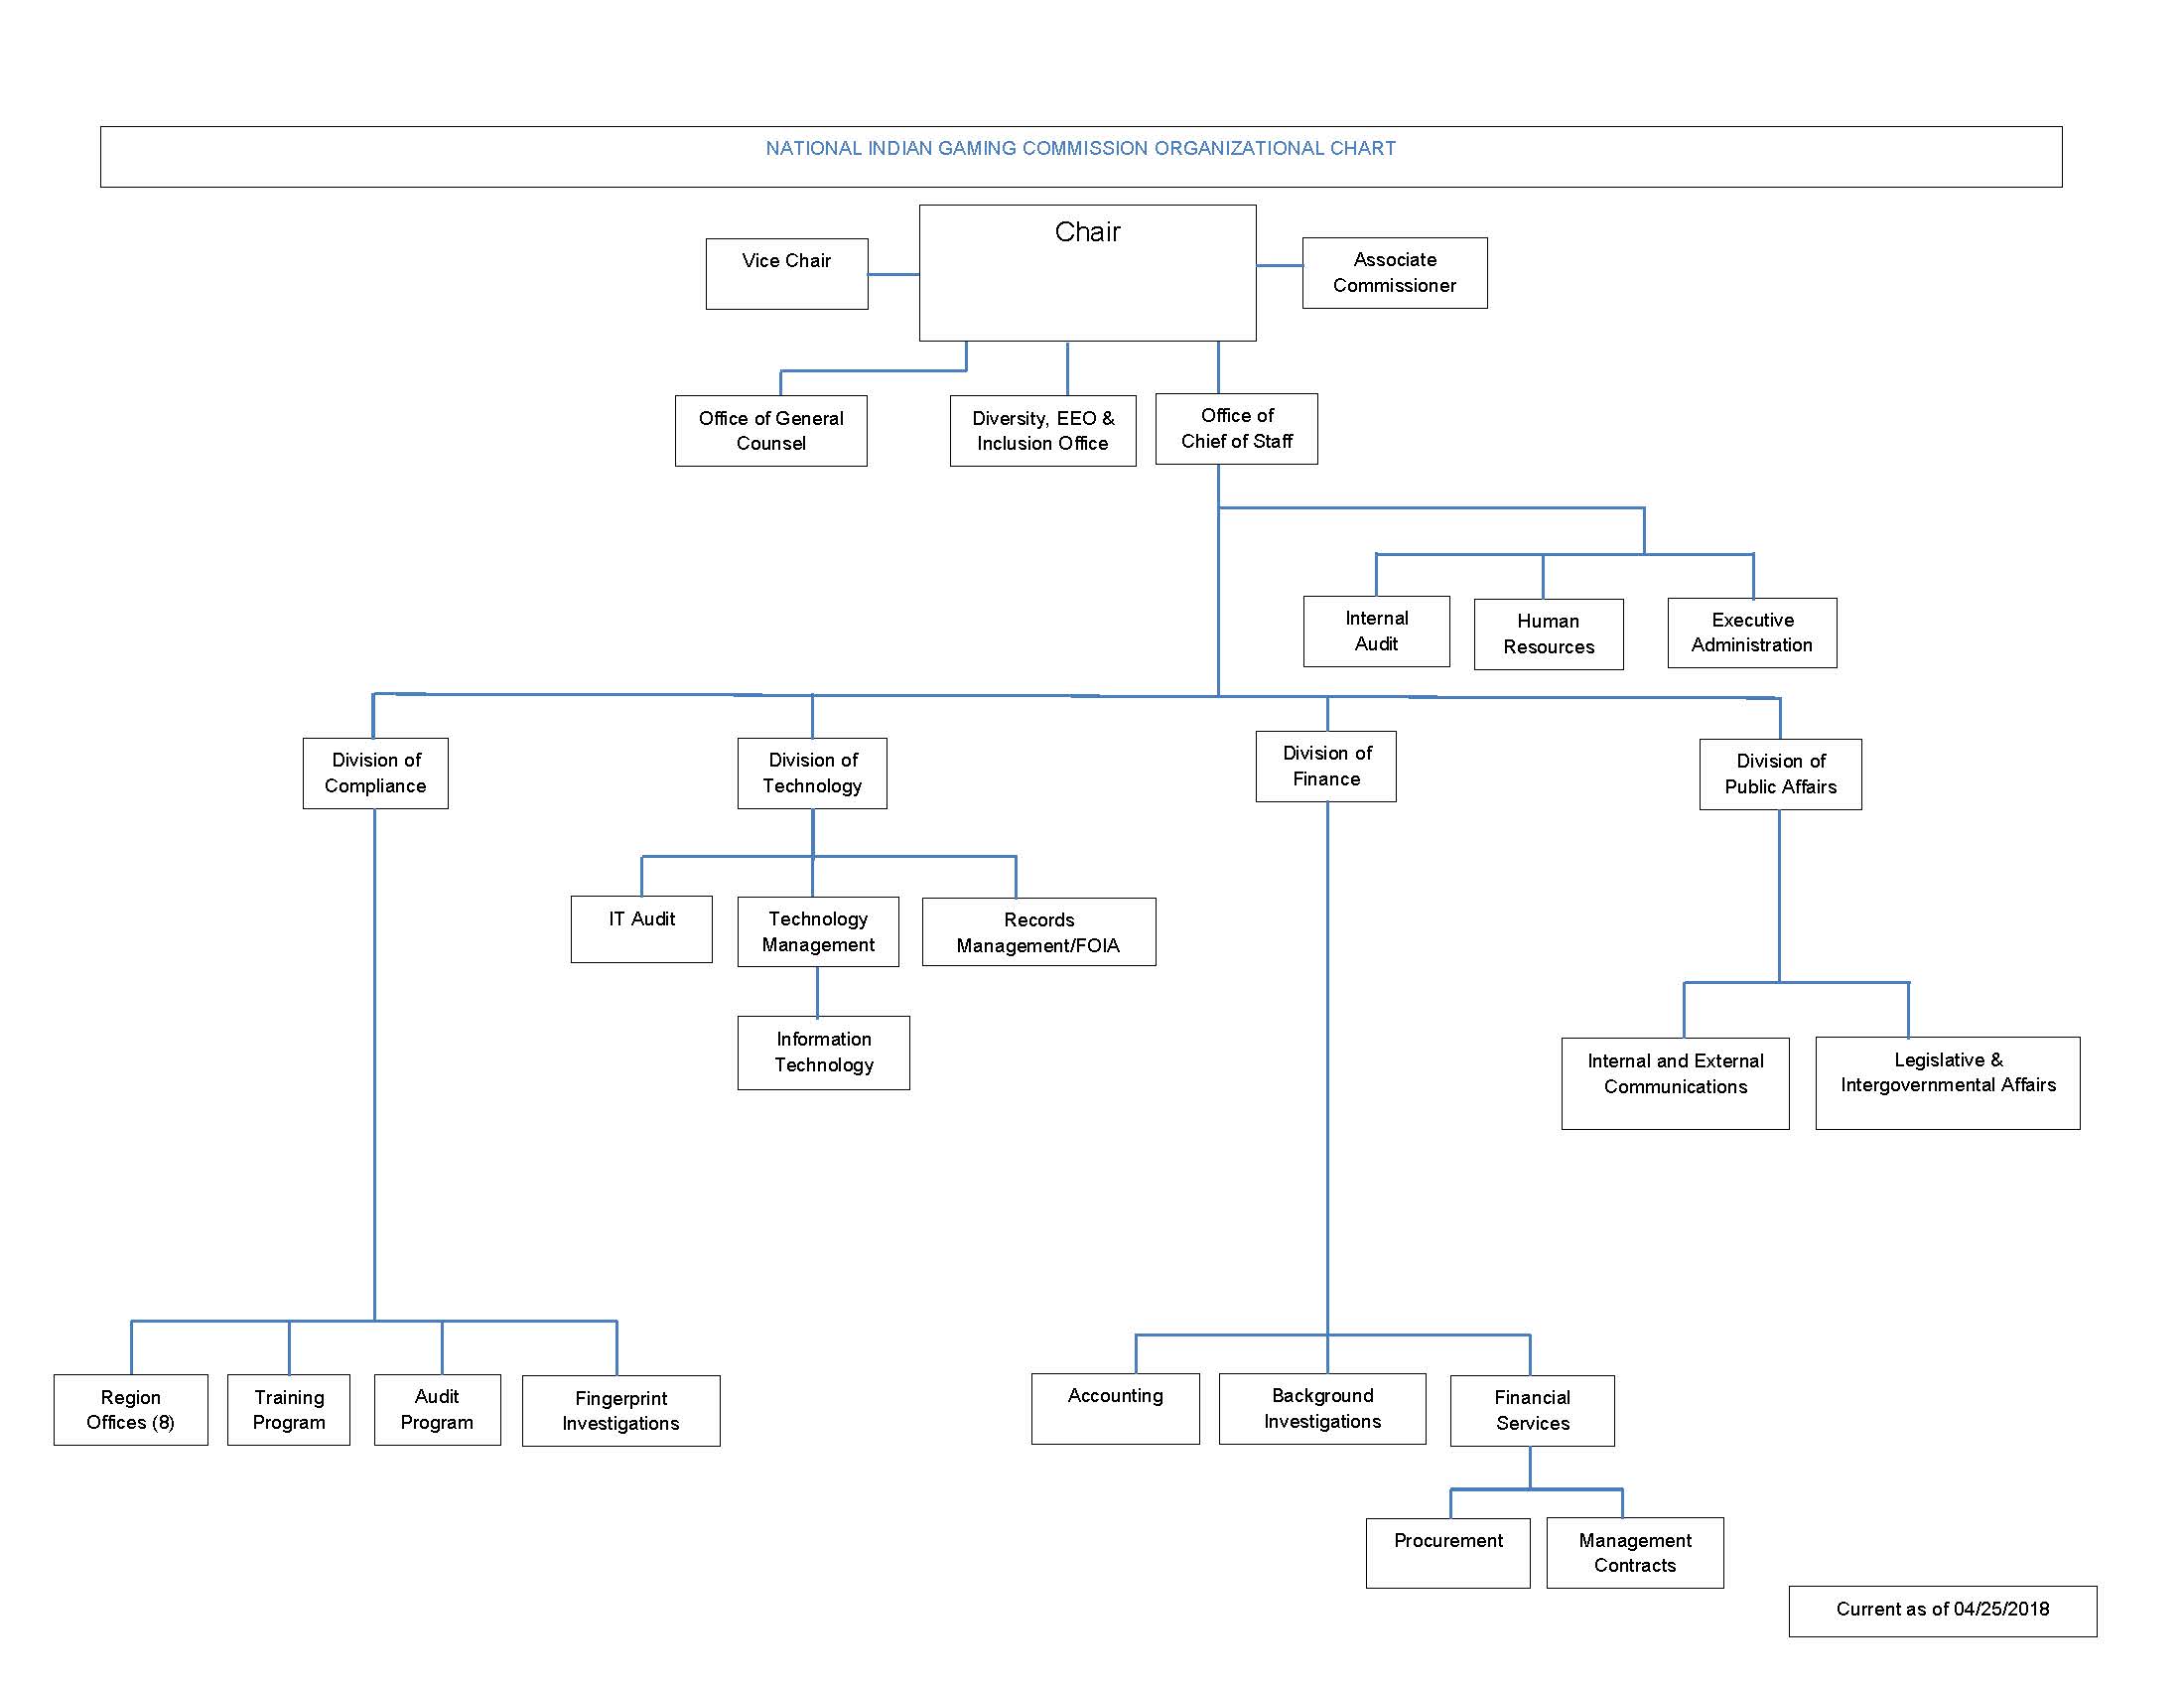 Organizational Structure National Indian Gaming Commission